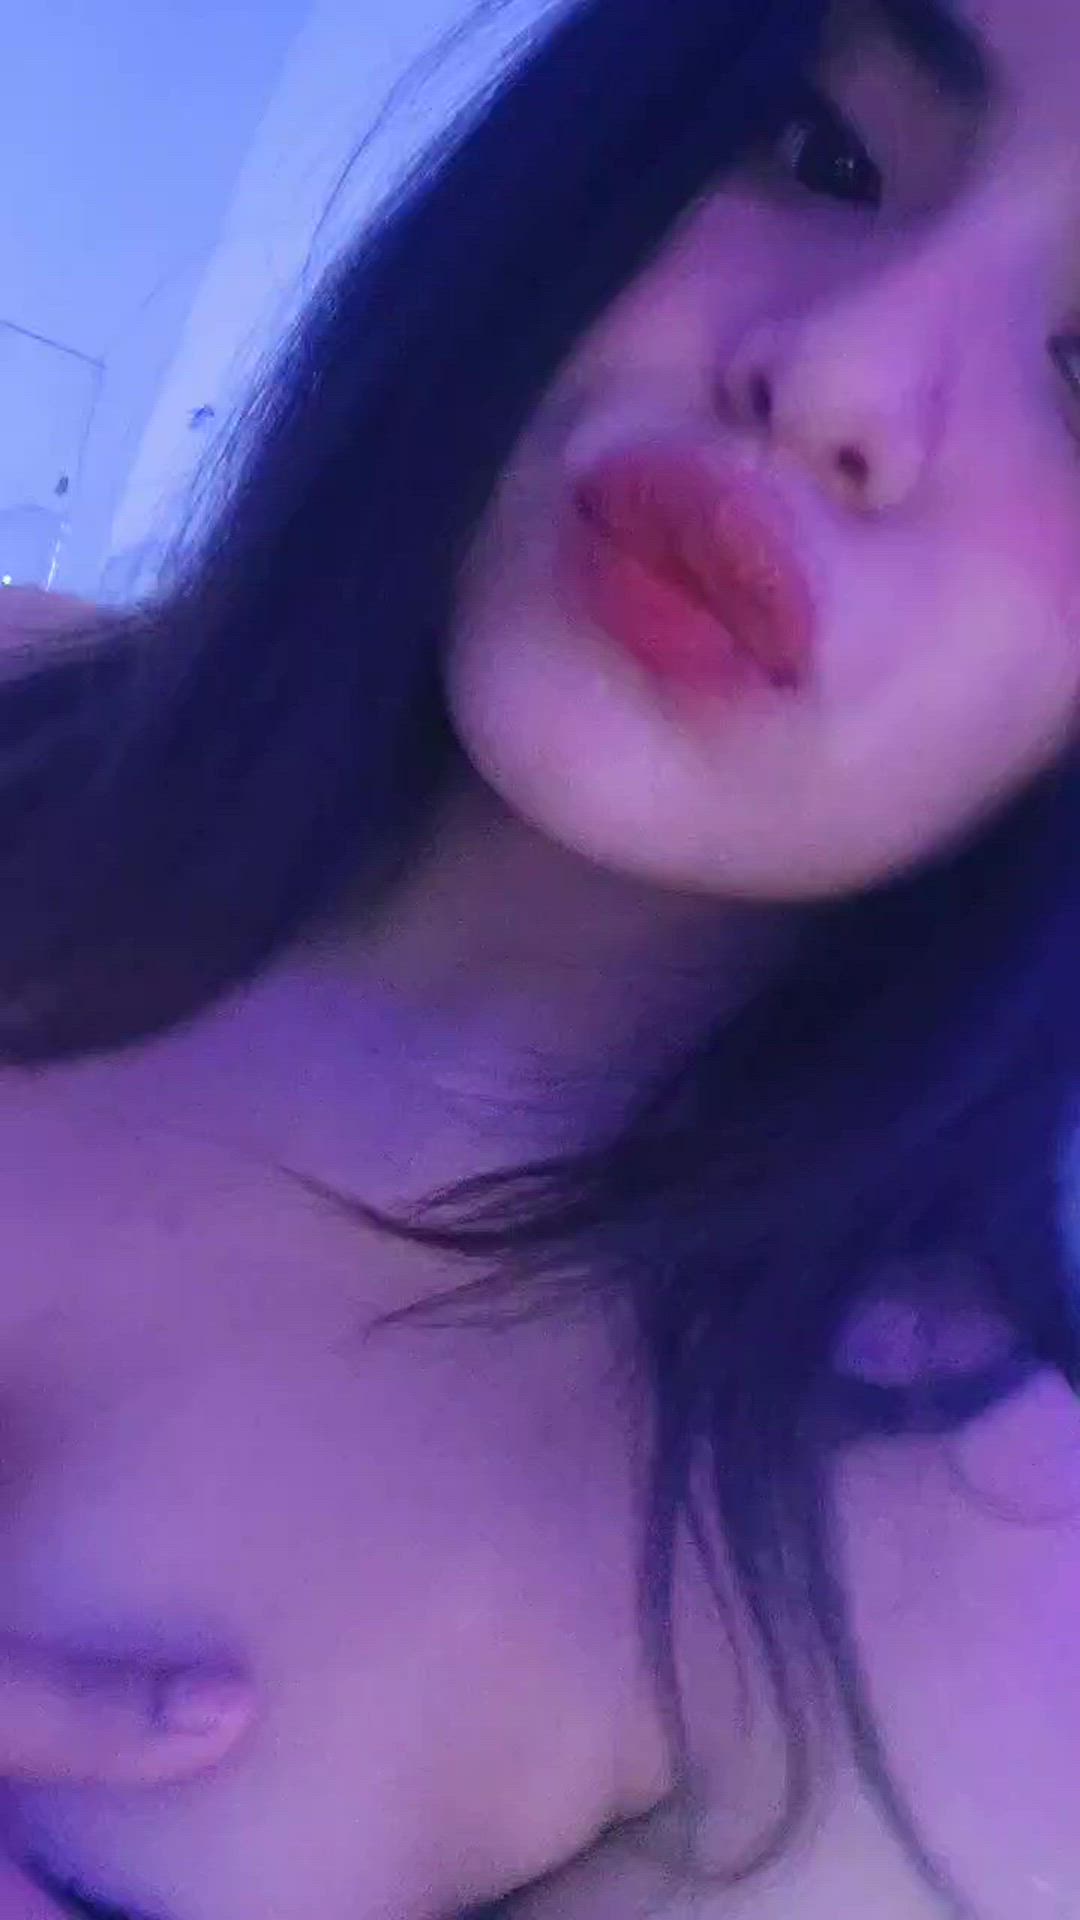 Tits porn video with onlyfans model EIKA Dugge <strong>@eikadugge</strong>